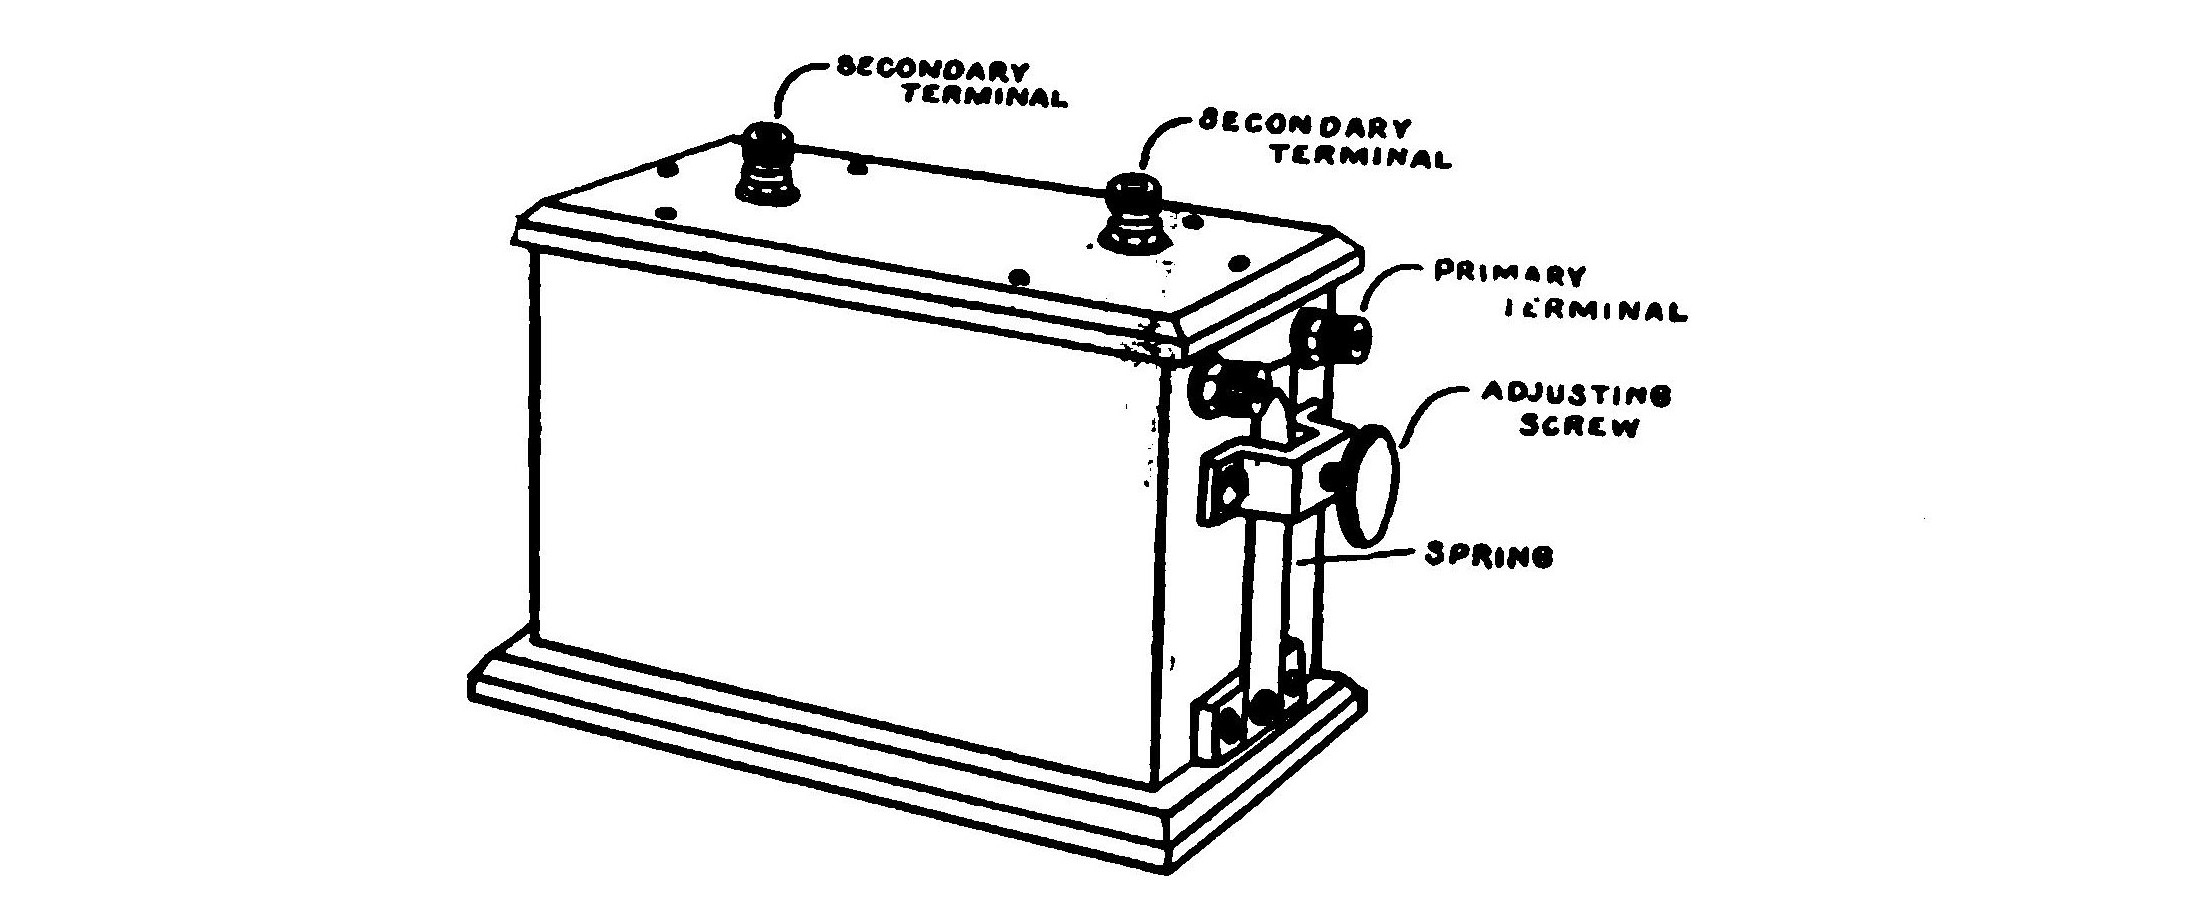 FIG. 35.—Induction coil for wireless telegraph purposes.